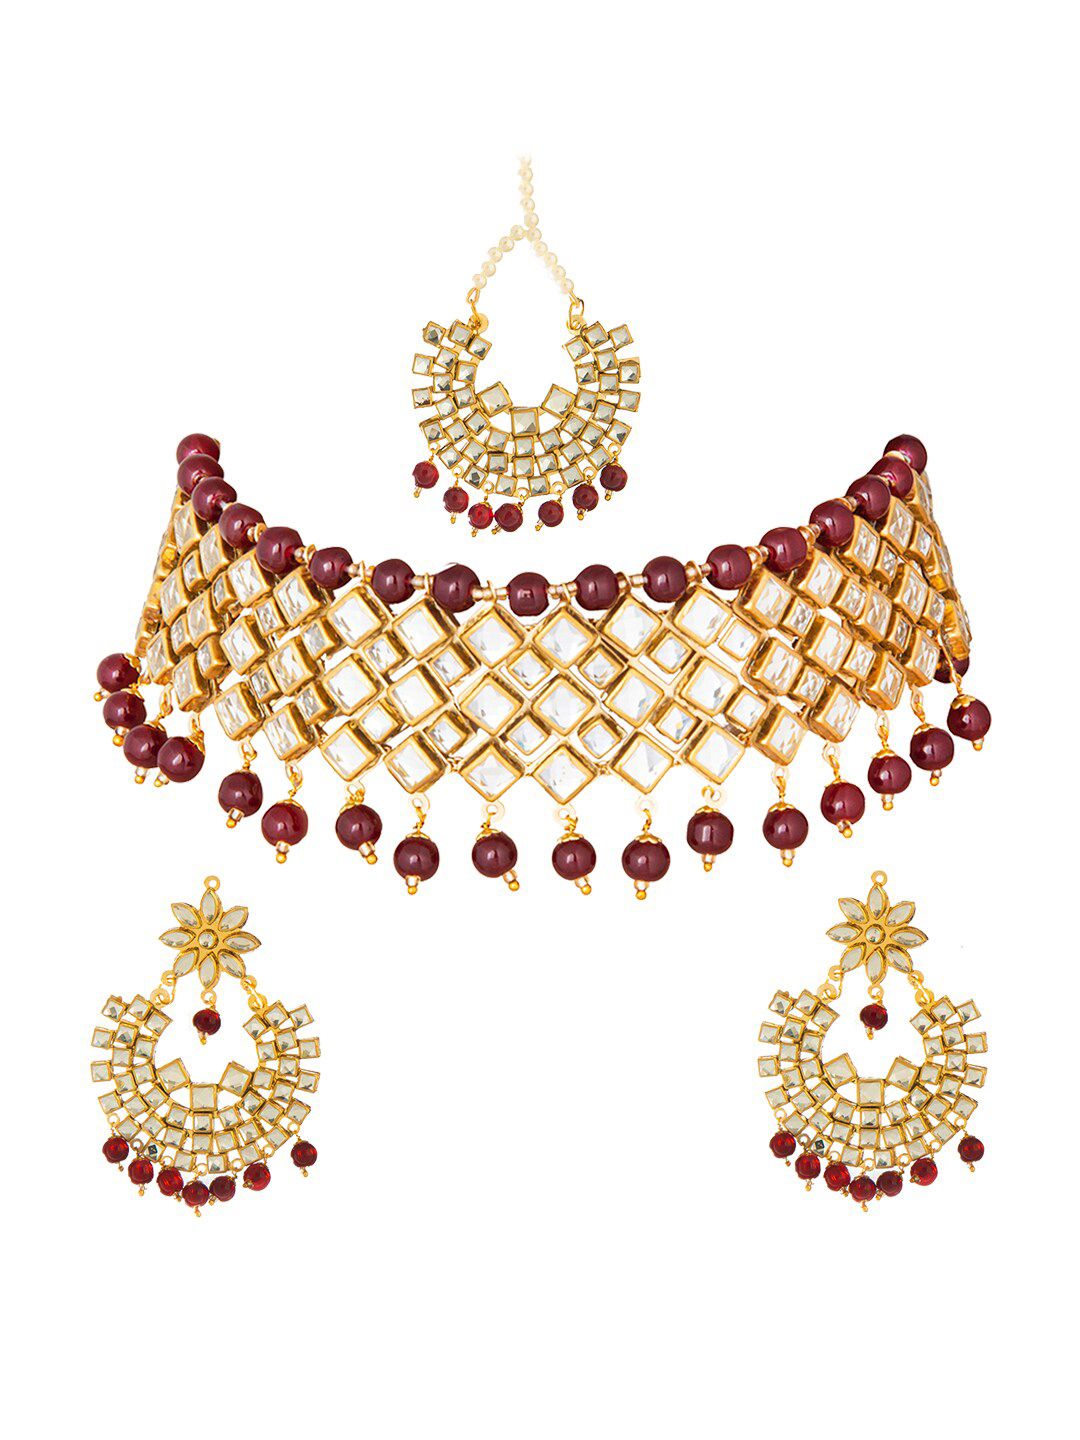 Shining Jewel - By Shivansh Gold-Toned & Red Brass Gold-Plated Choker Necklace Price in India